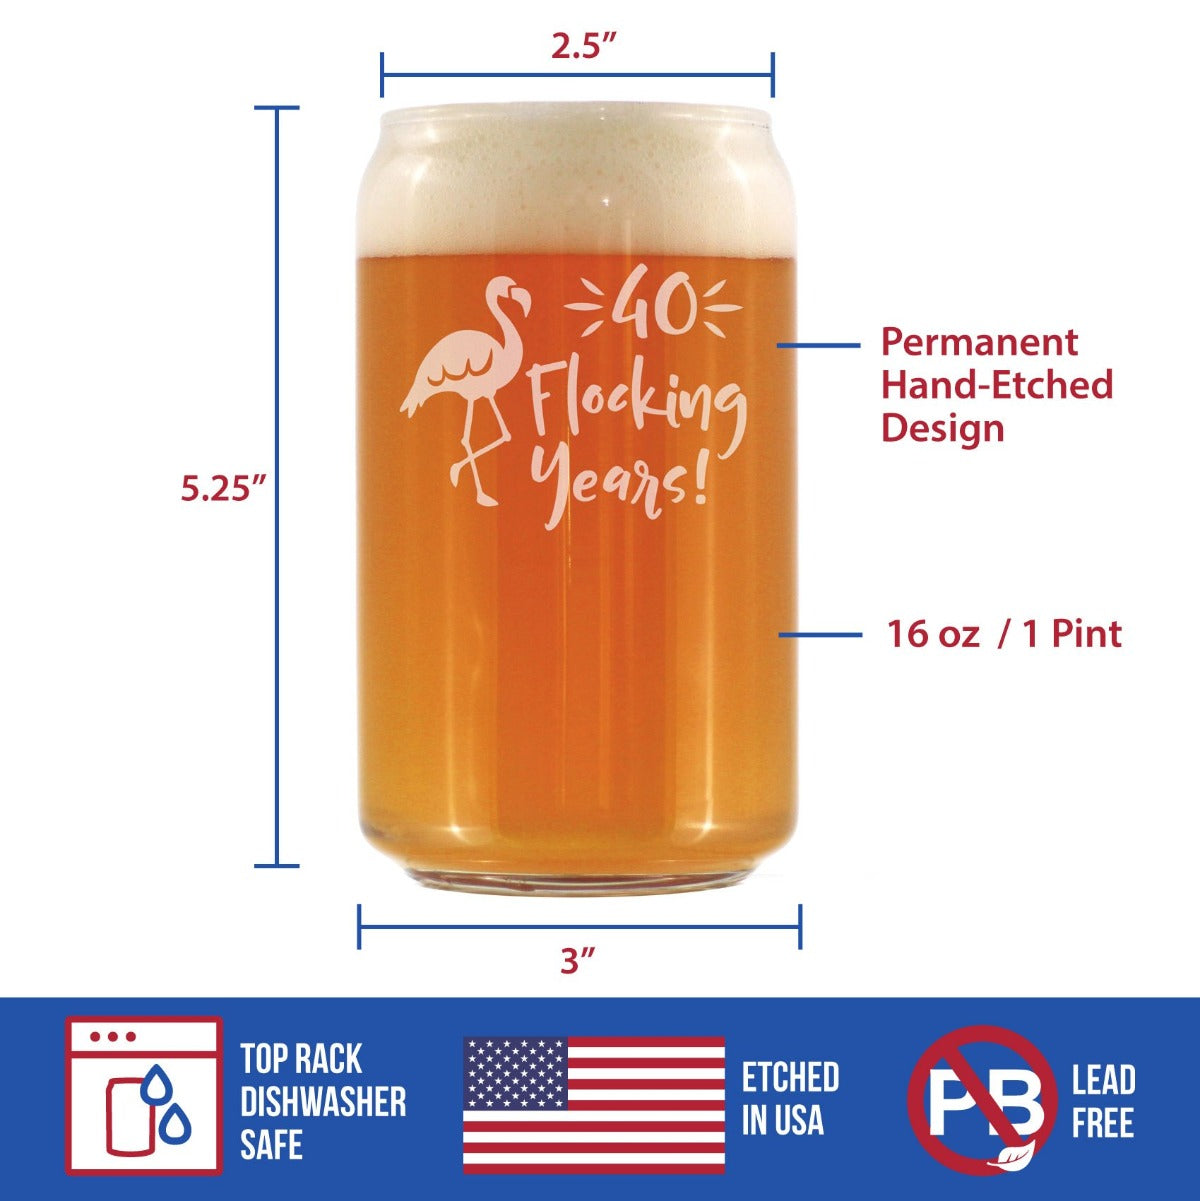 40 Flocking Years - 16 Ounce Beer Can Pint Glass